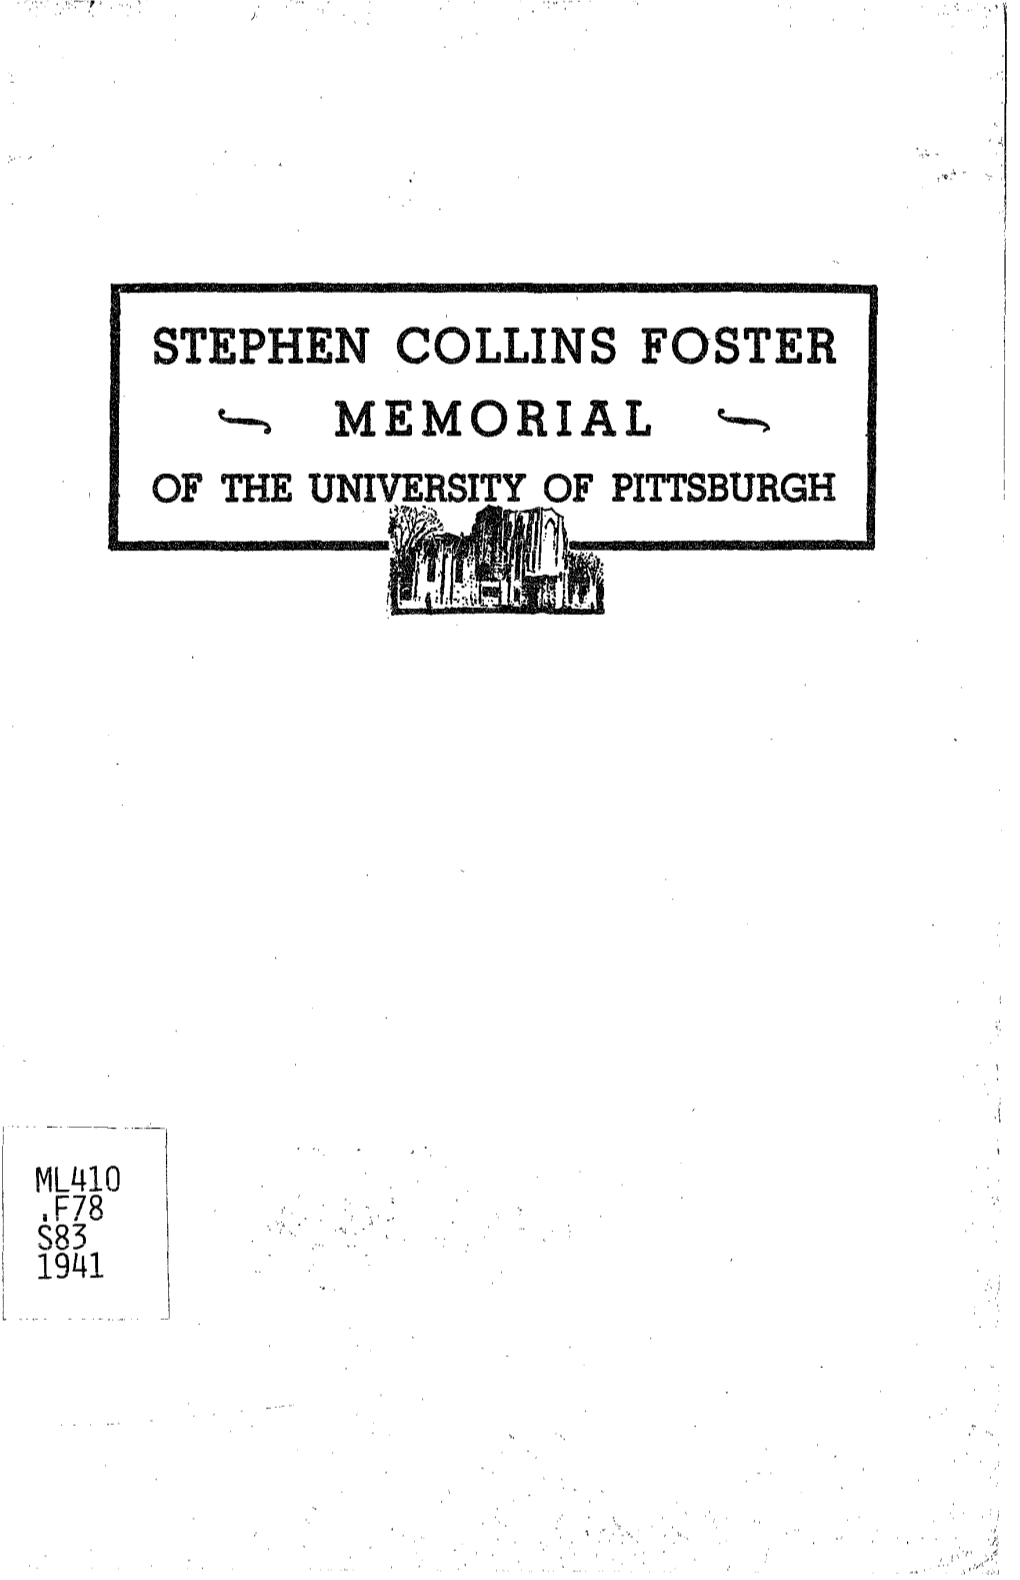 Stephen Collins Foster Memorial of the Pittsburgh